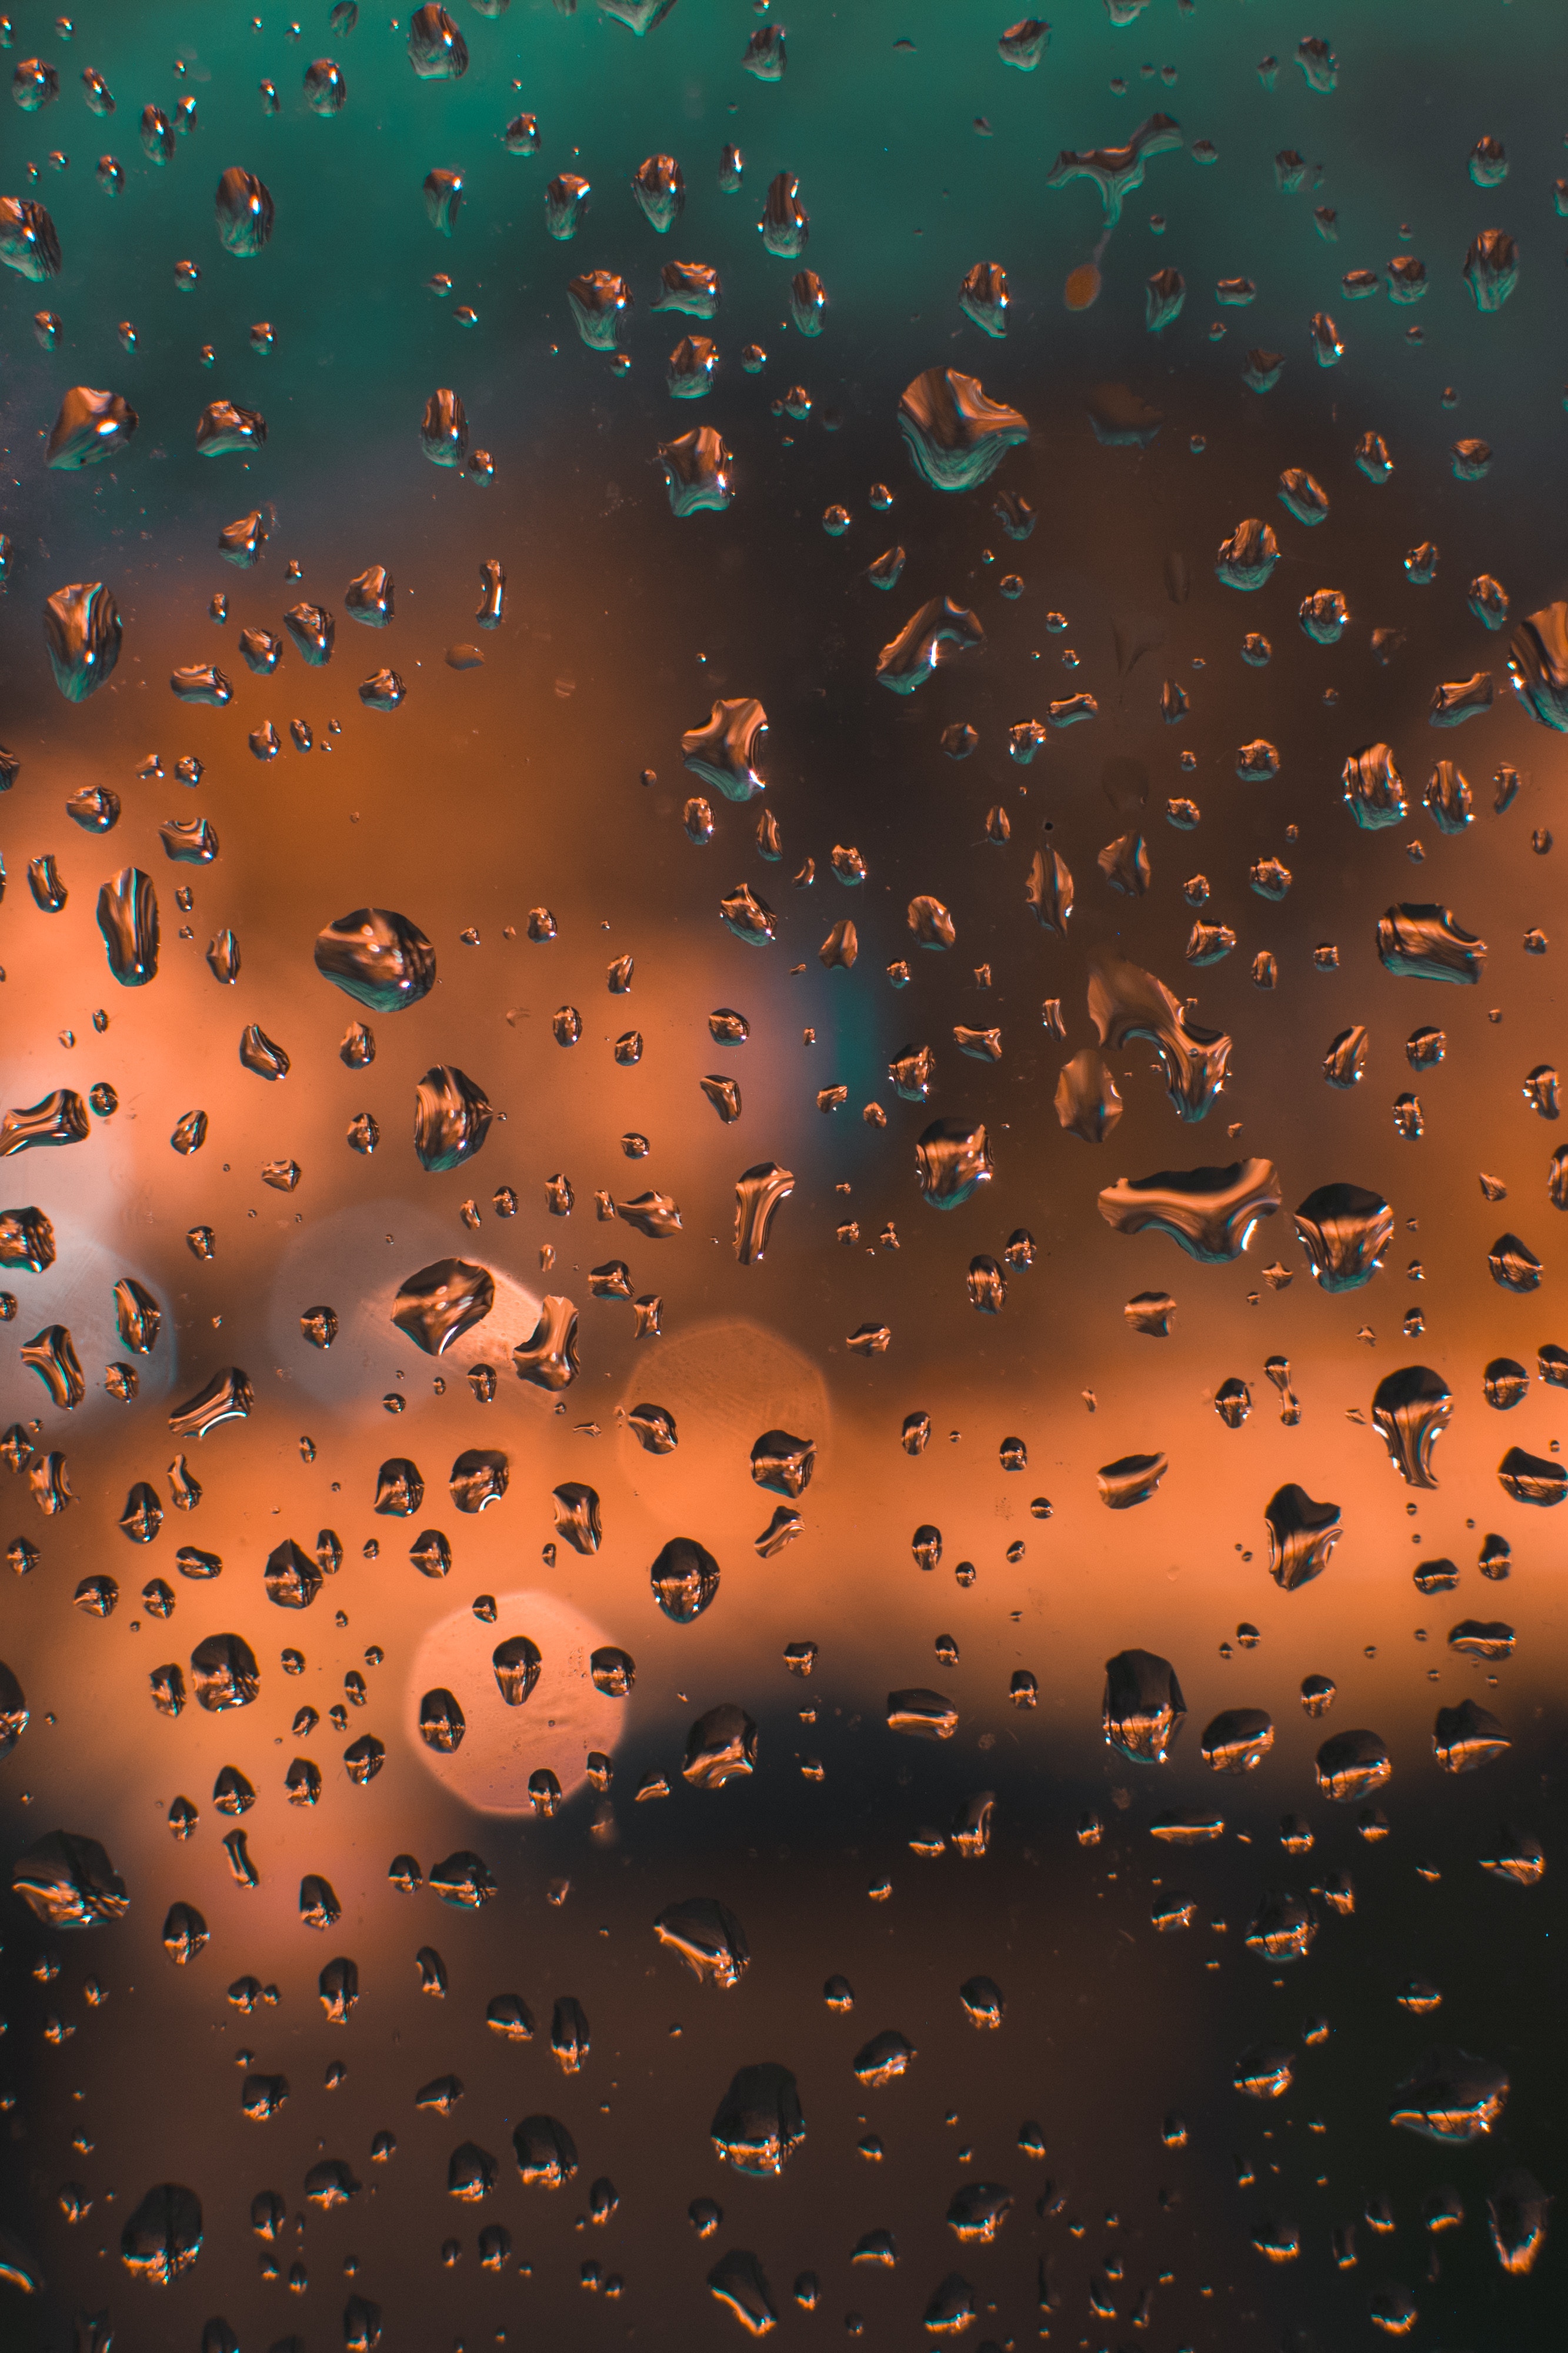 glare, drops, macro, surface, glass, stains, spots